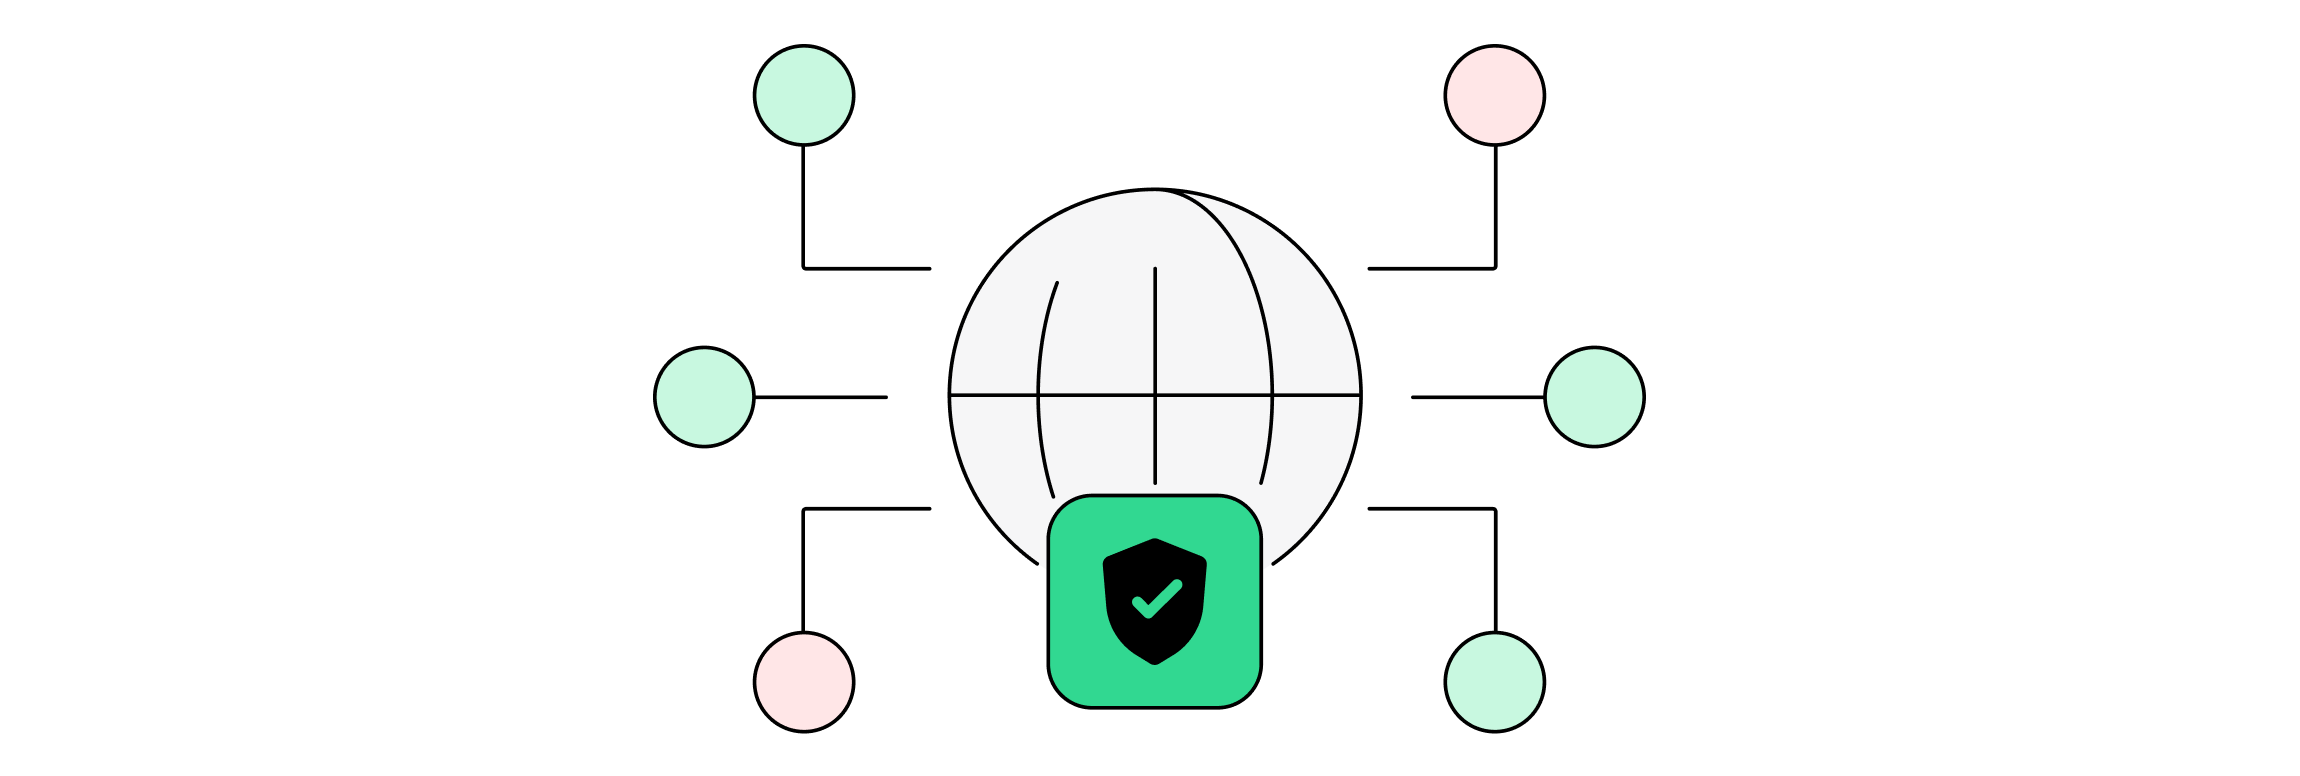 An illustration of a globe with different endpoints. A green box with a checkmark is on top of the globe.